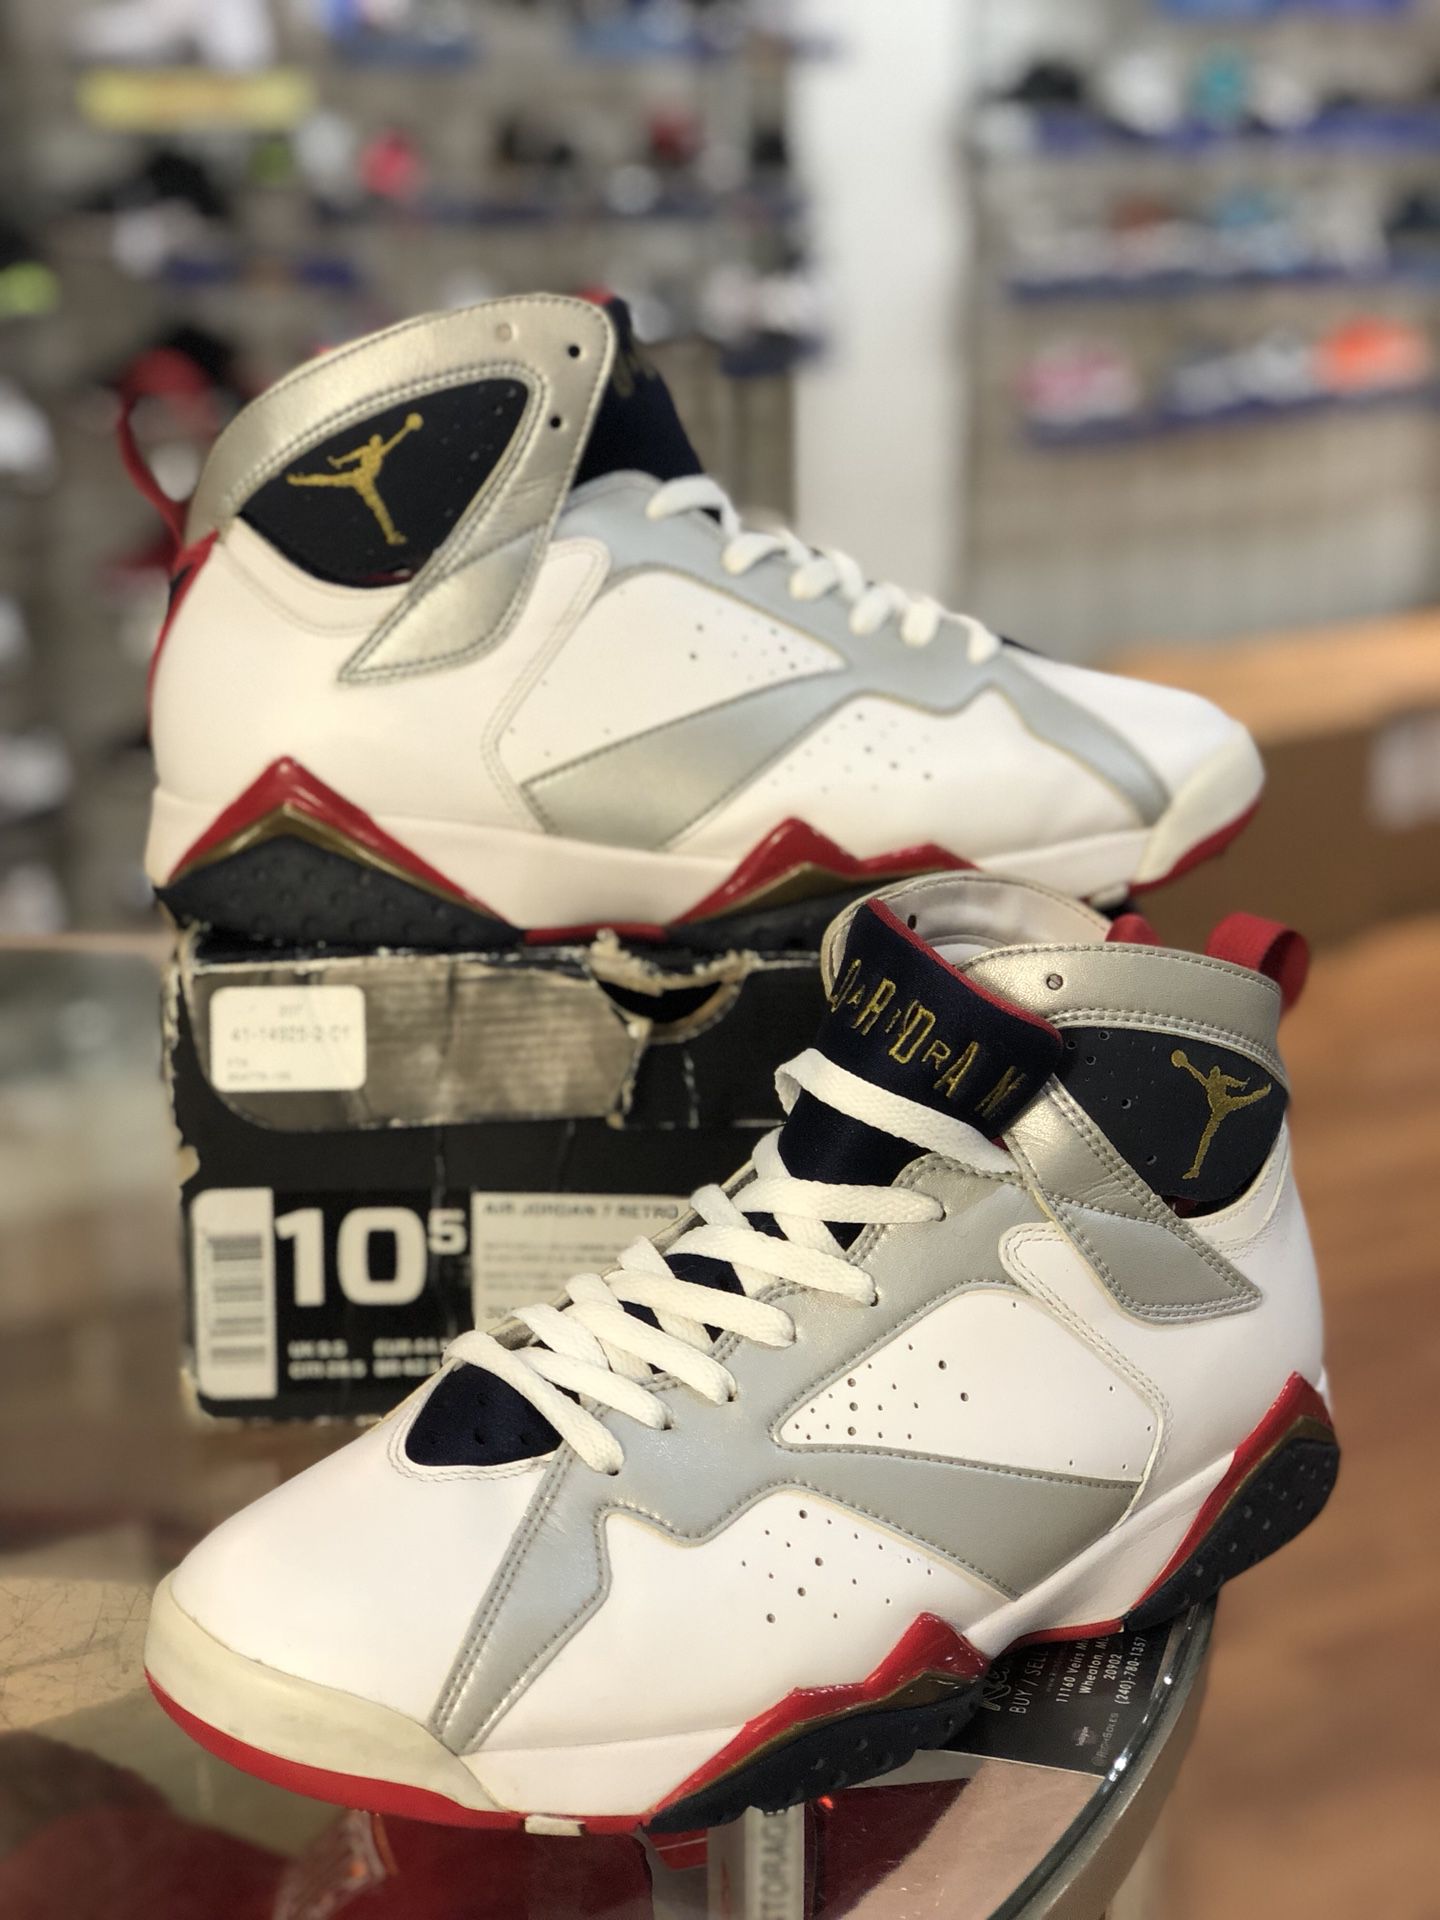 Olympic 7s size 10.5